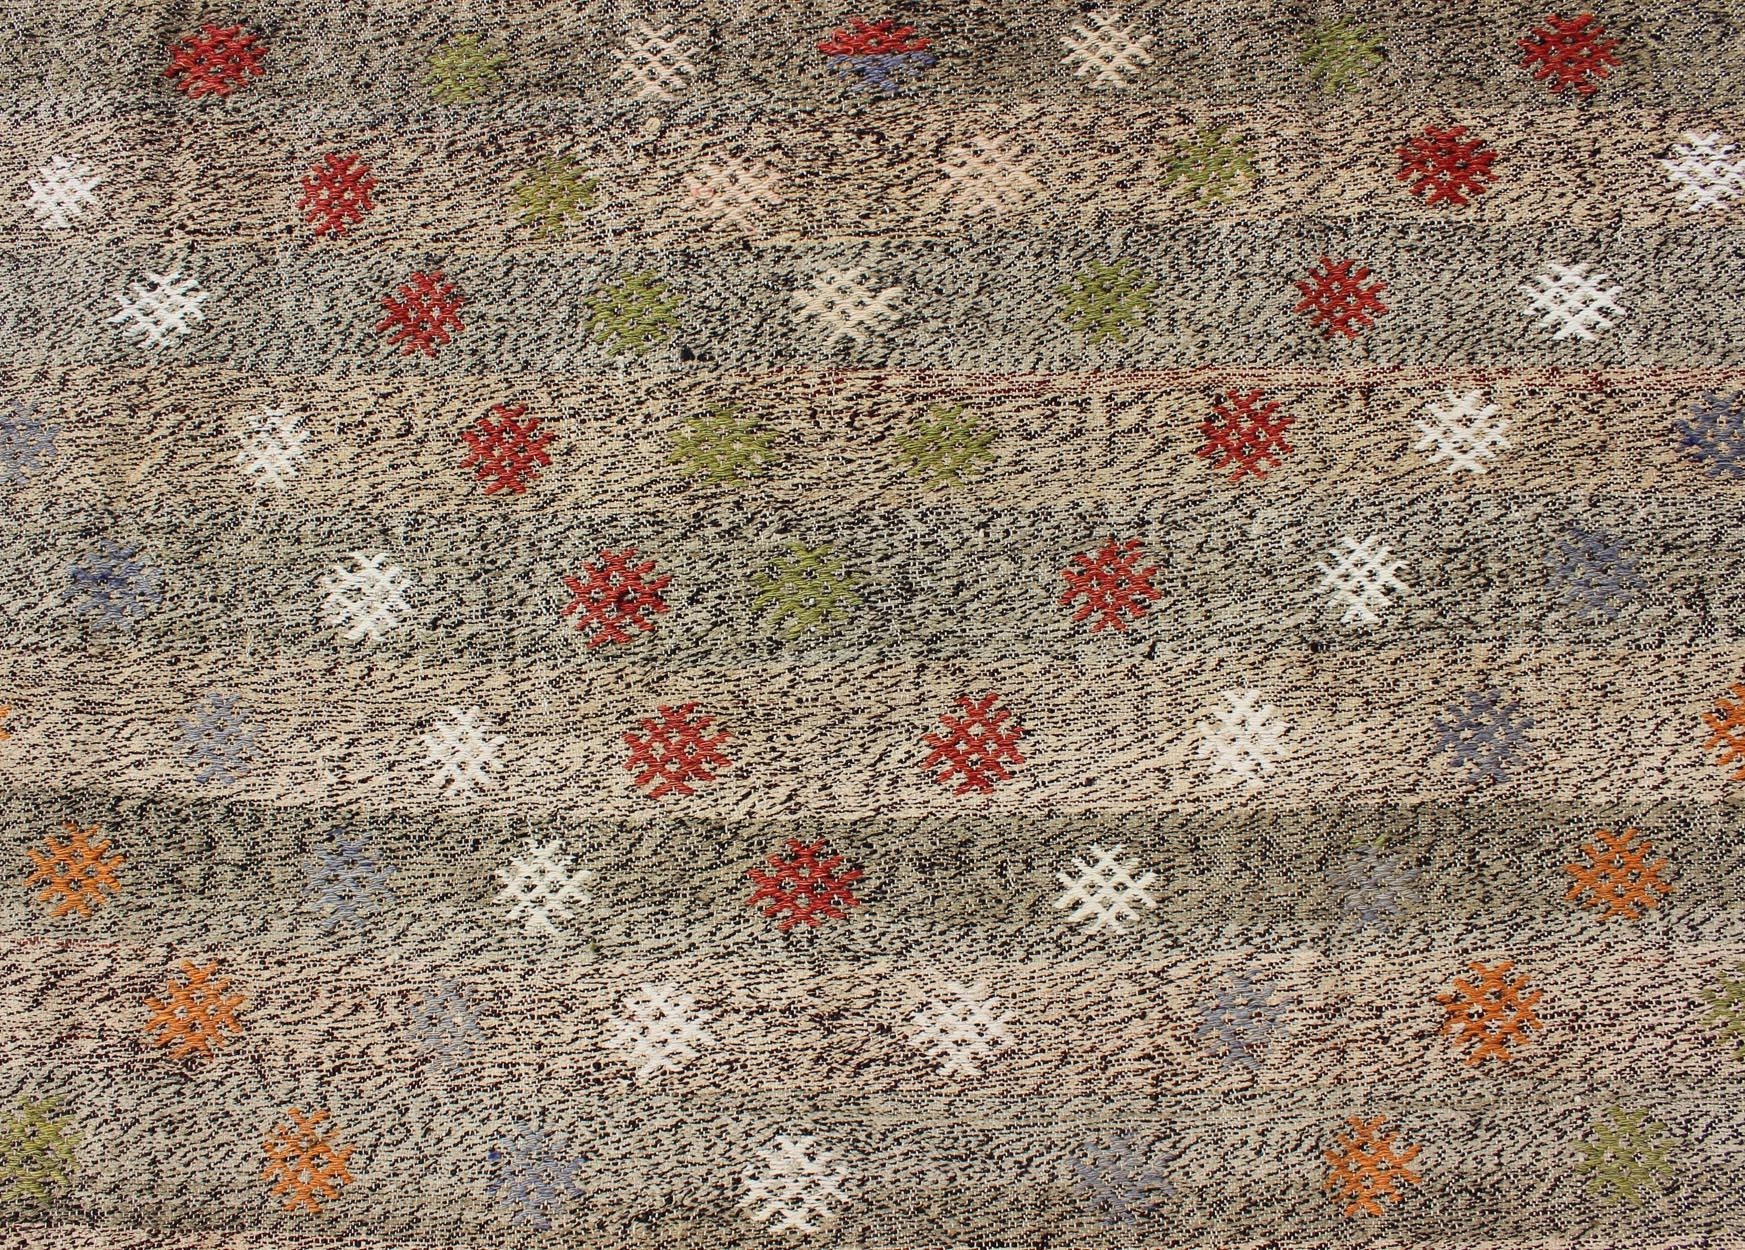 Vintage Kilim Rug from Turkey with All-Over Diamond Pattern 1